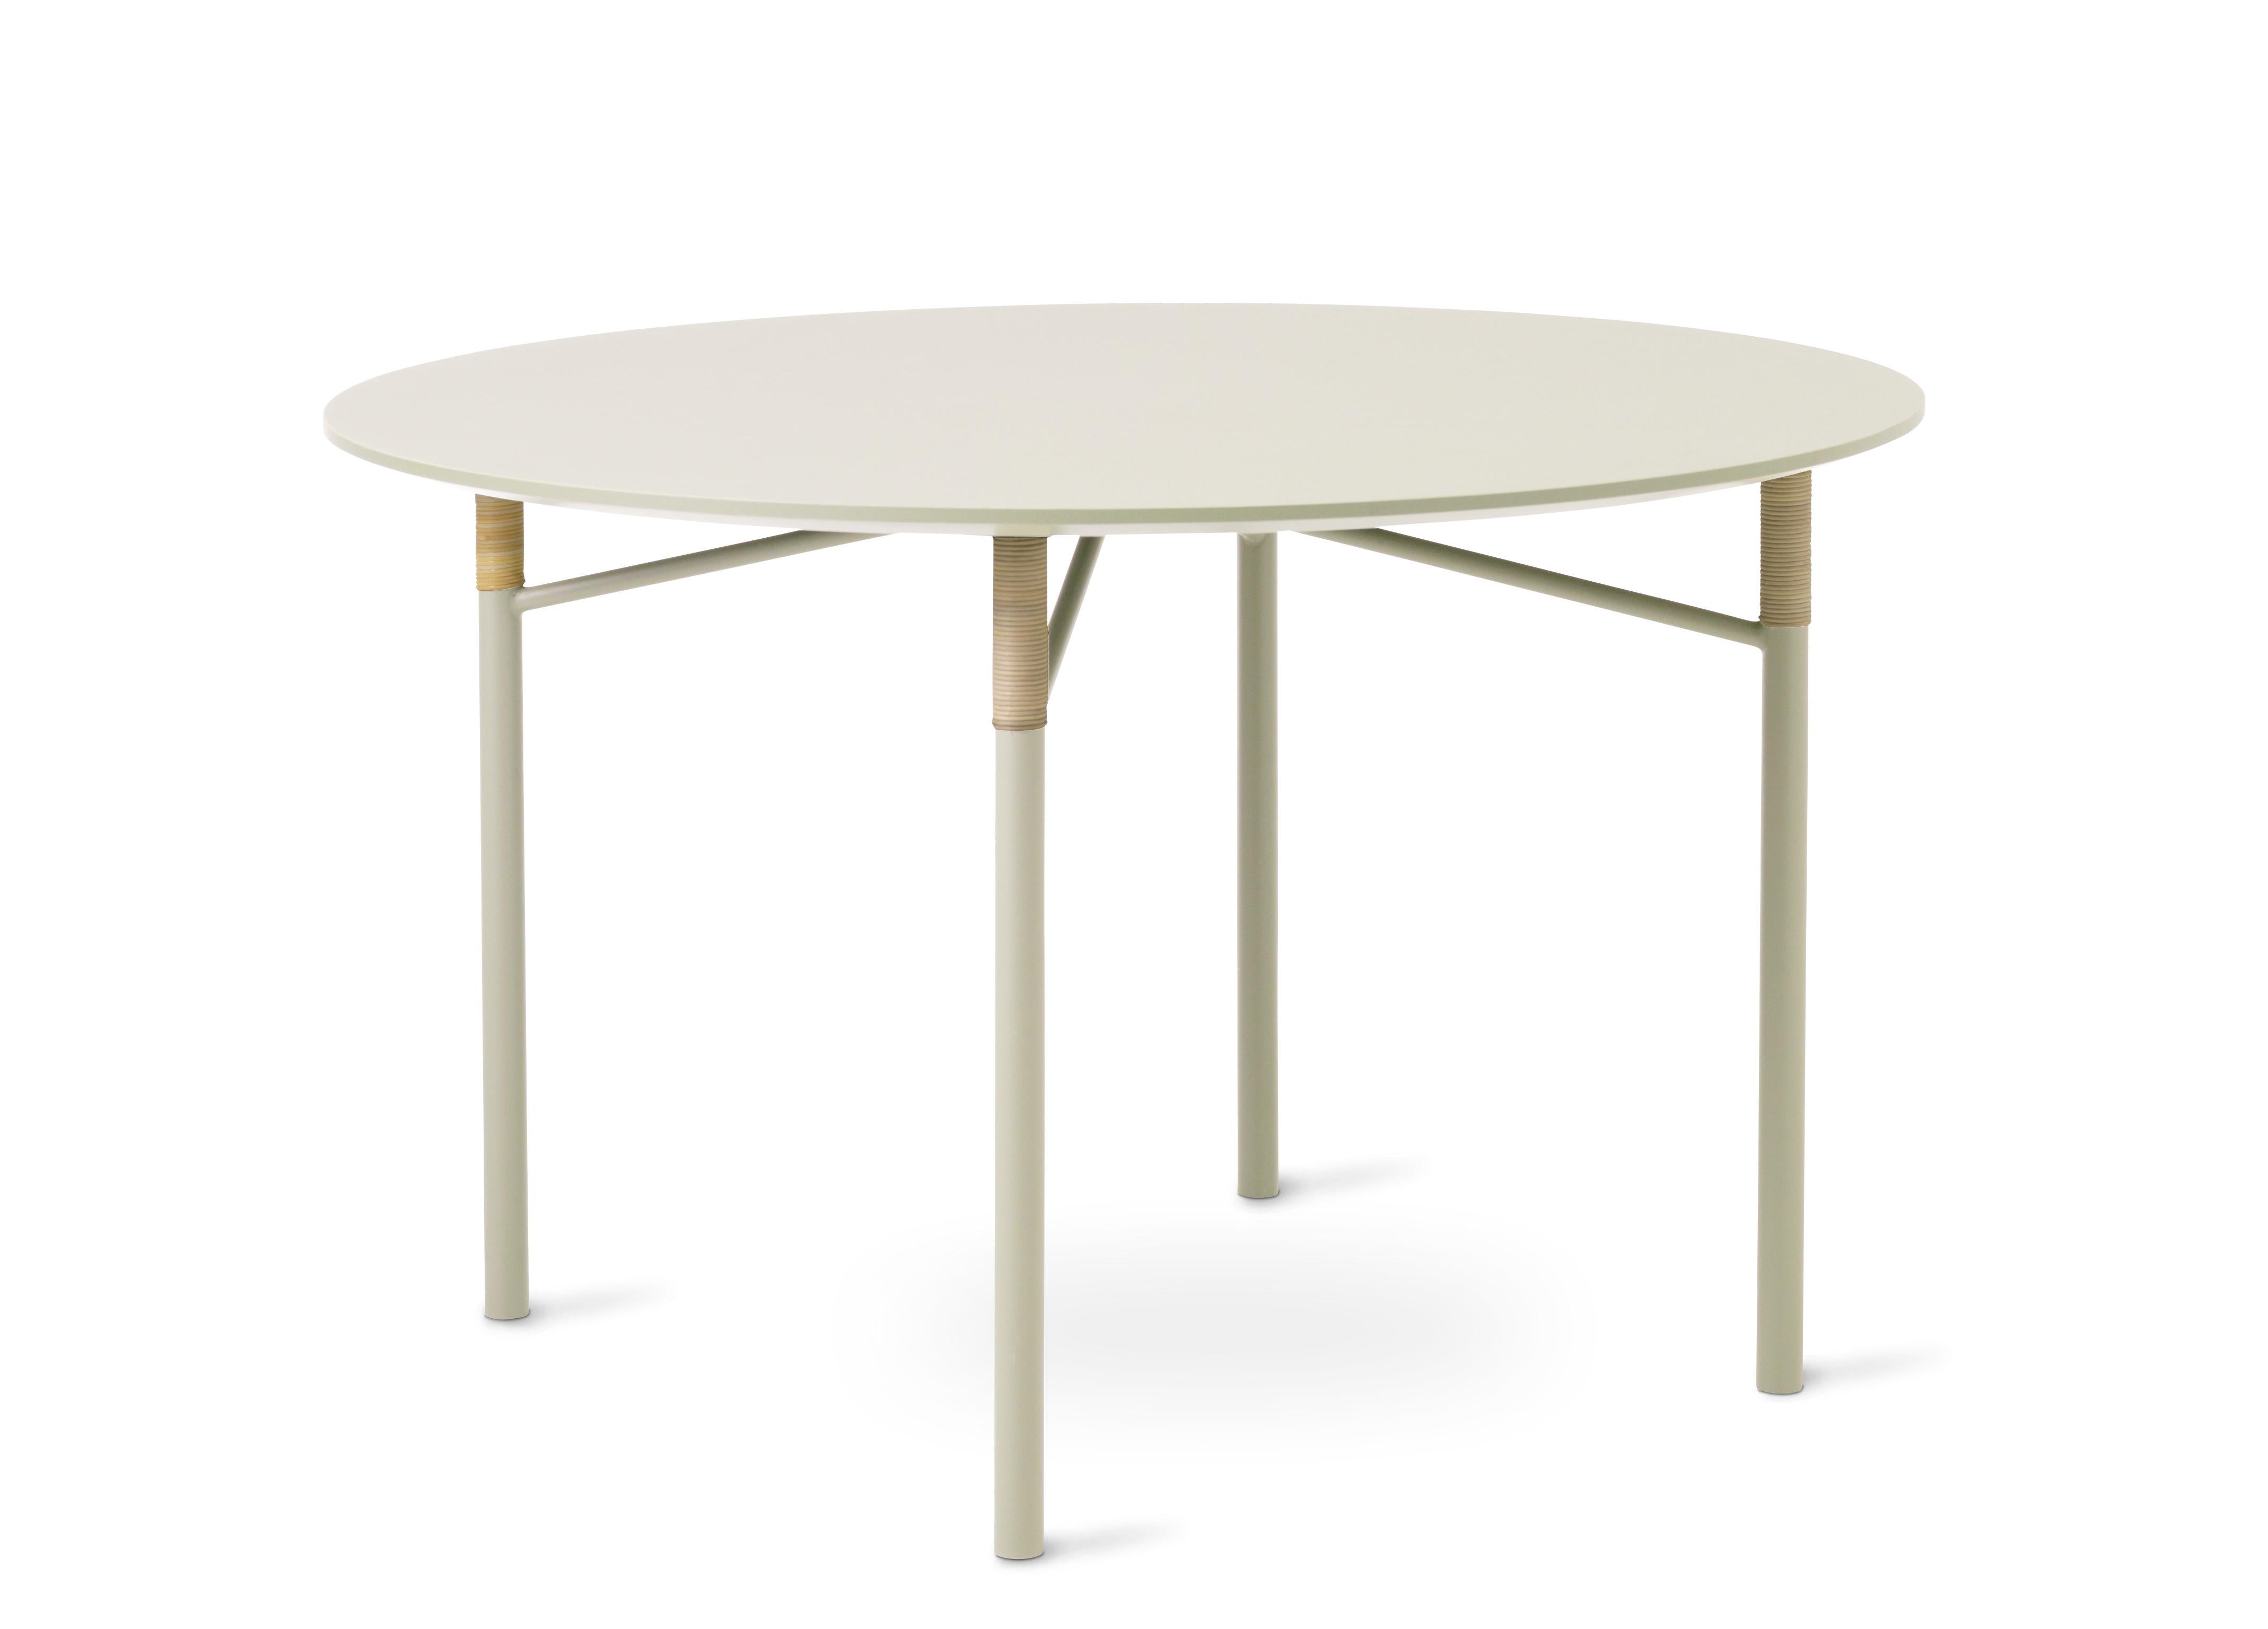 For Sale: Pink (Mushroom) Affinity Round Dining Table, by Halskov & Dalsgaard from Warm Nordic